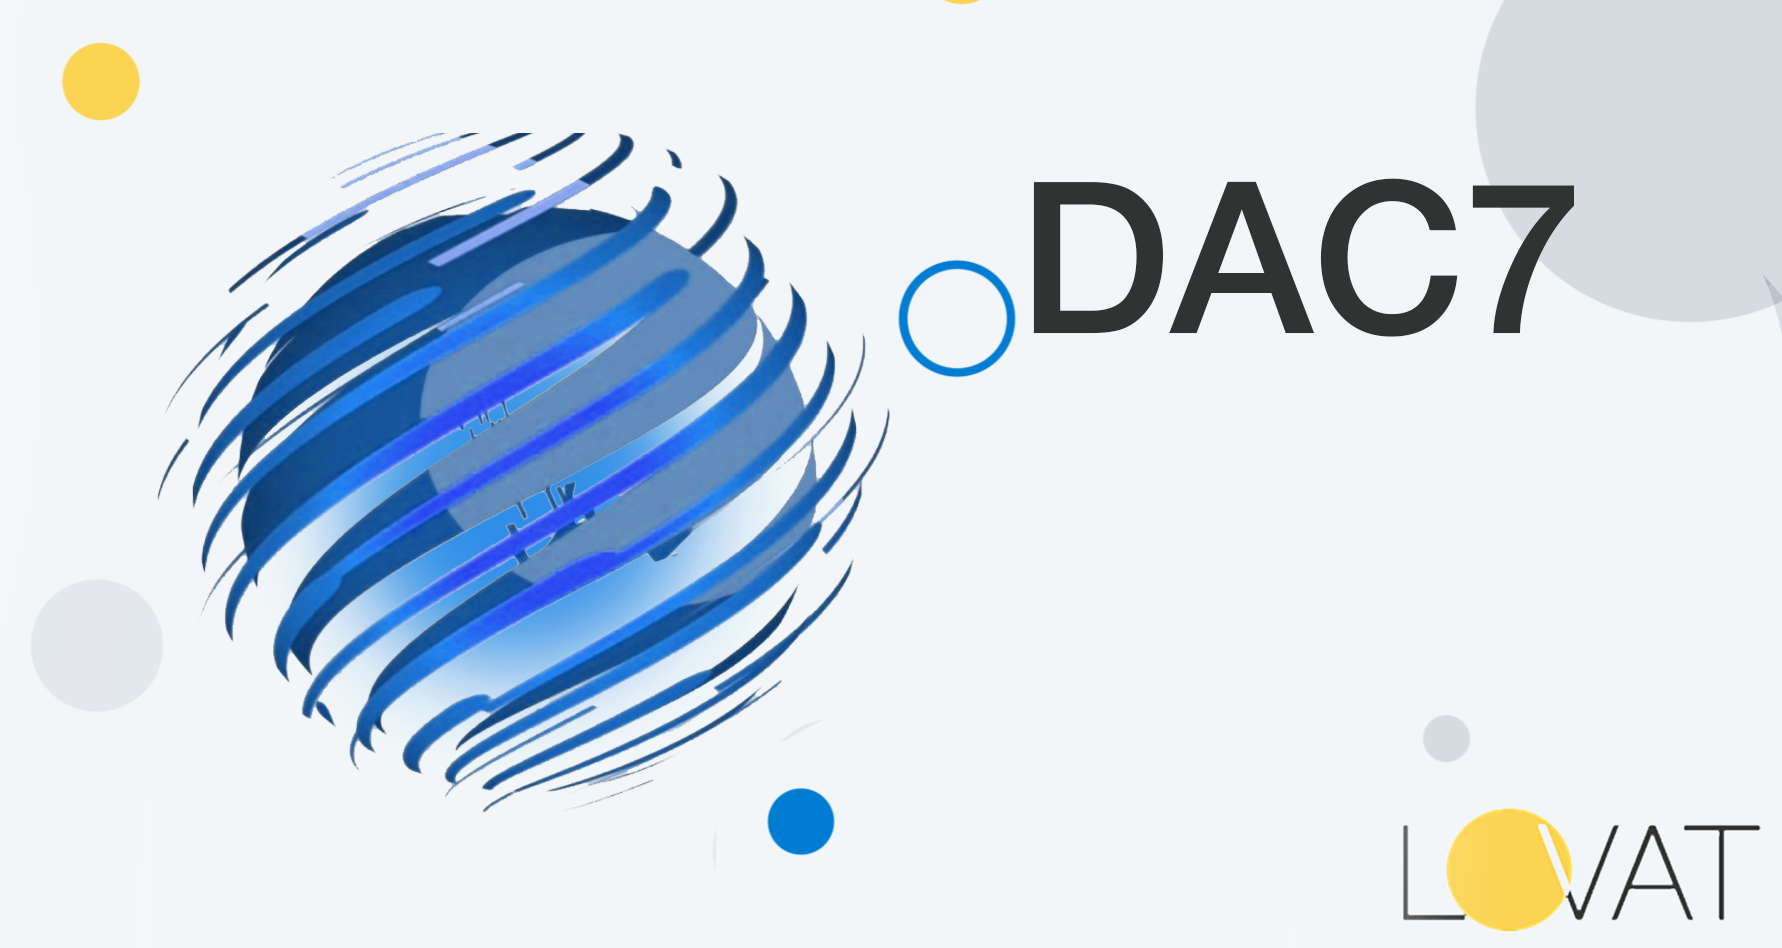 DAC7 – the new type of registration for online marketplaces